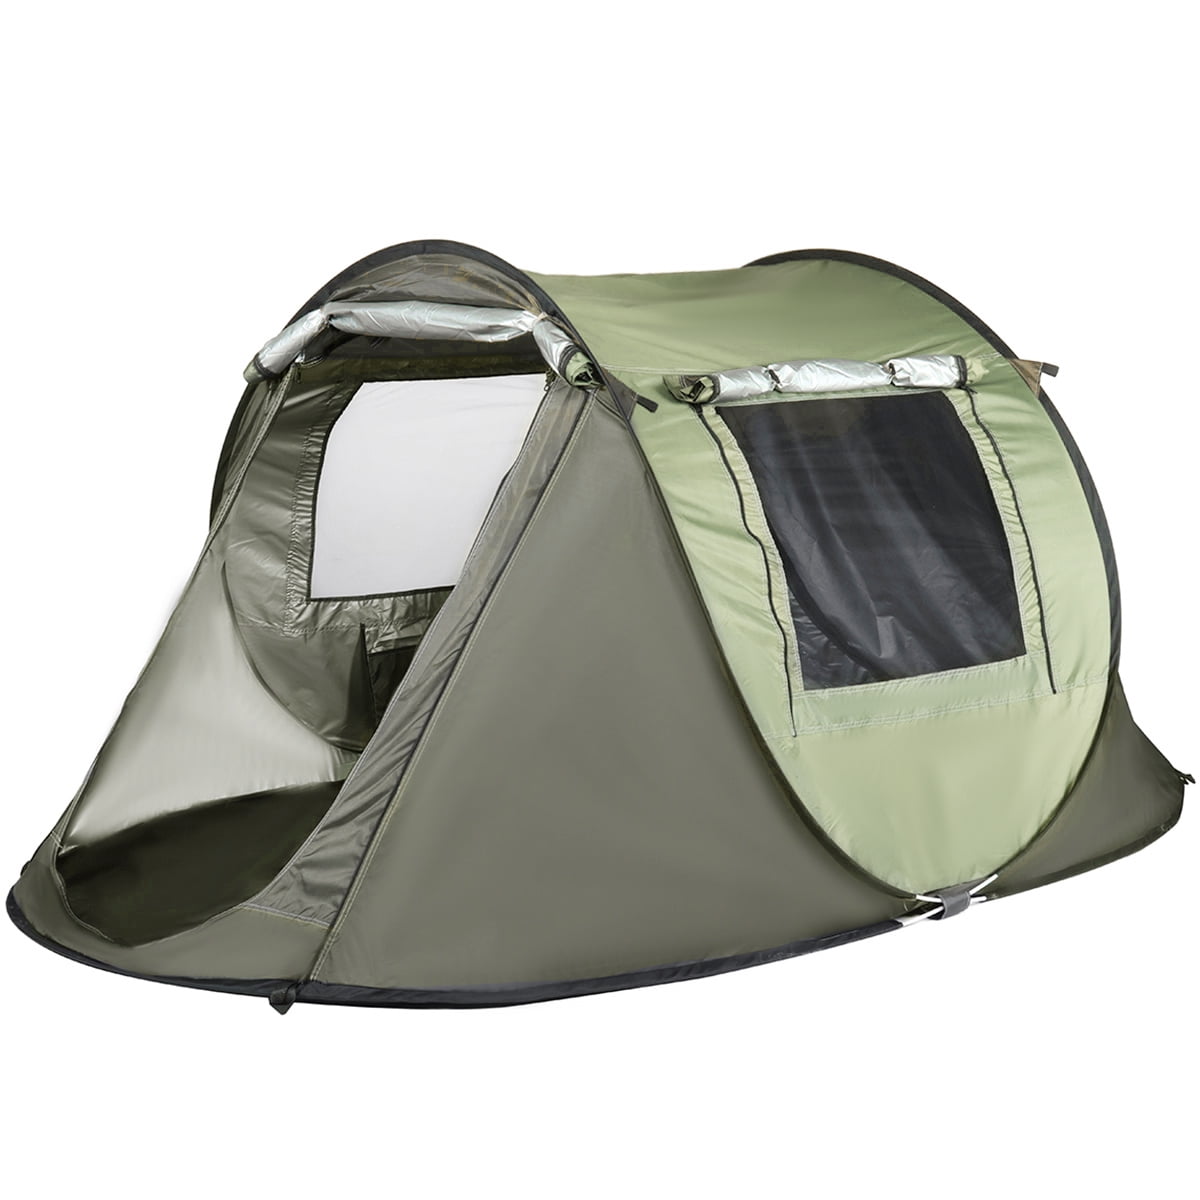 Ktaxon 3-4 People Family Outdoor Waterproof Tent Camping Hiking 